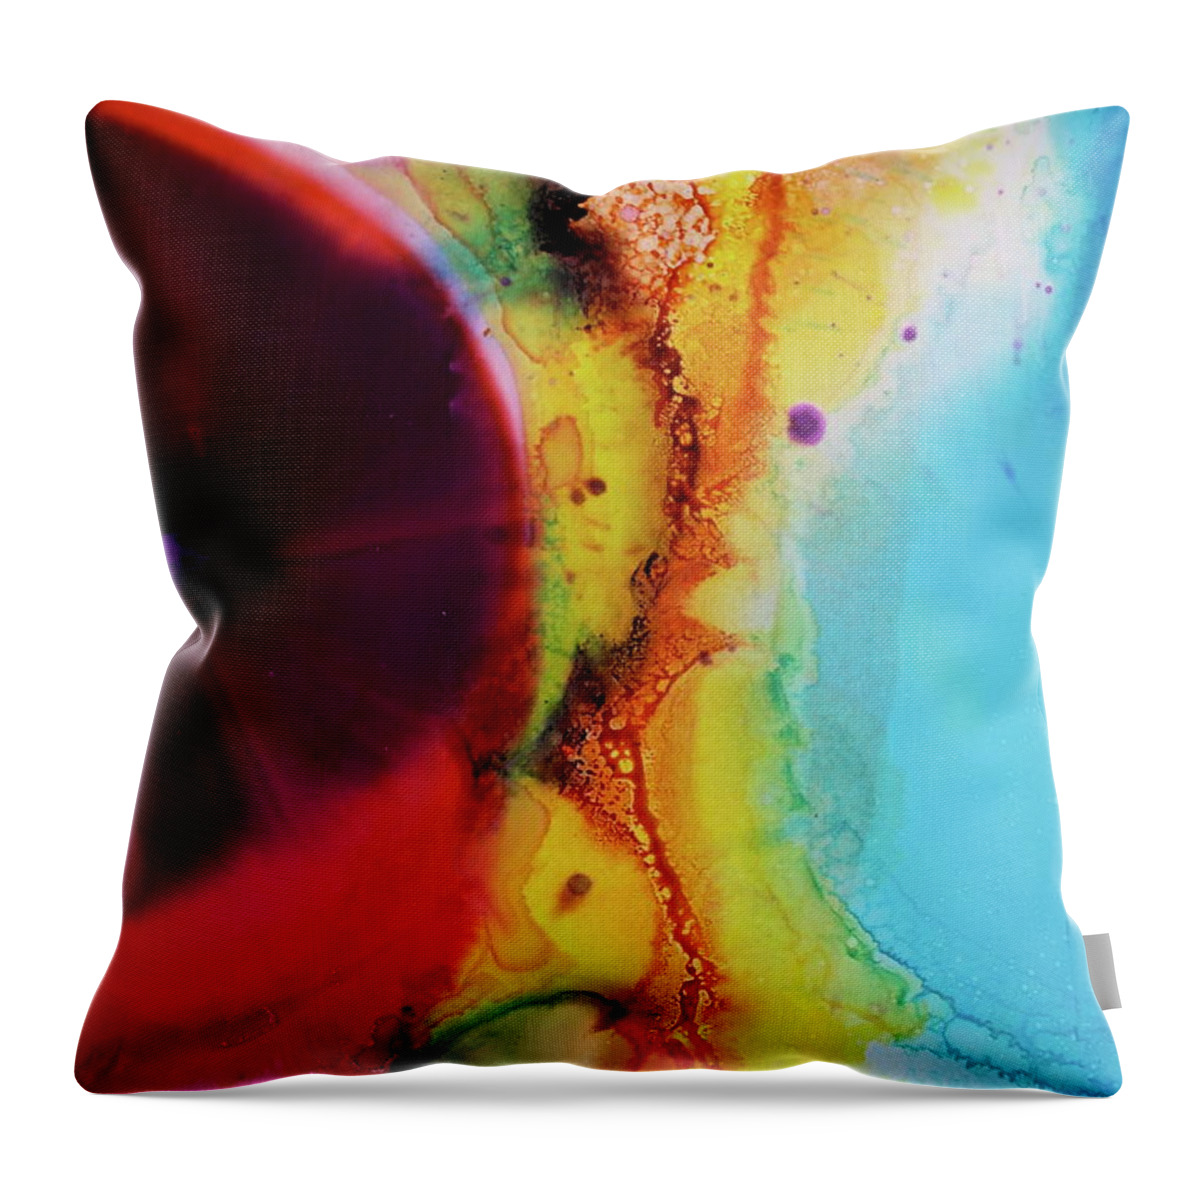 Alcohol Ink Throw Pillow featuring the painting Conjunction by Michele Myers